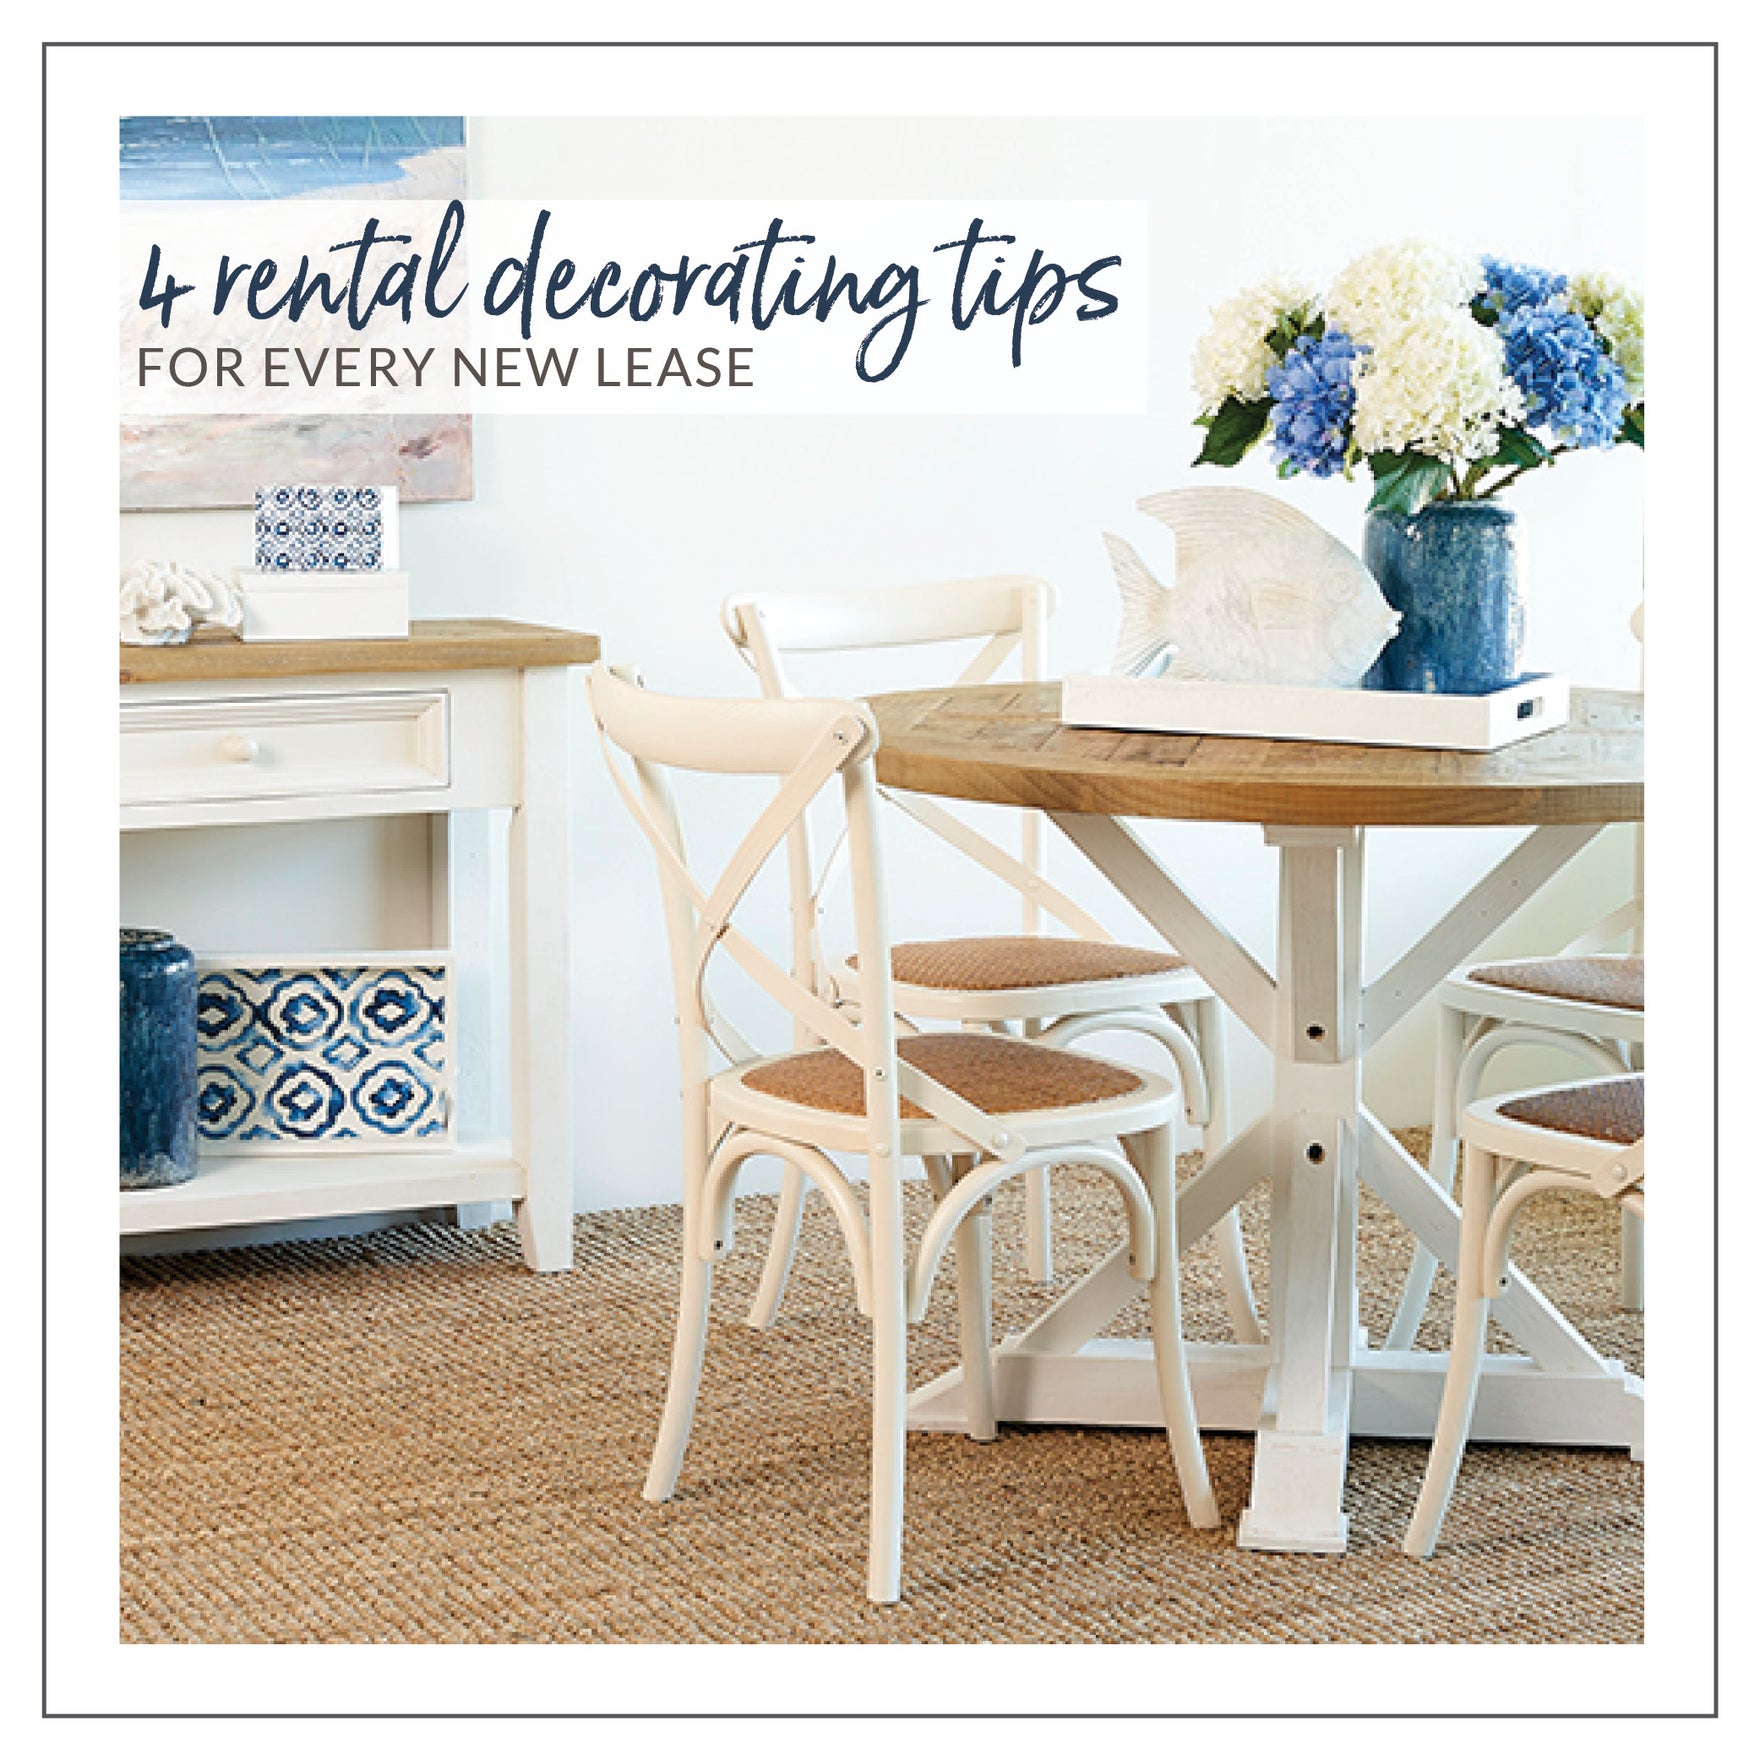 4 Rental Decorating Tips For Every New Lease